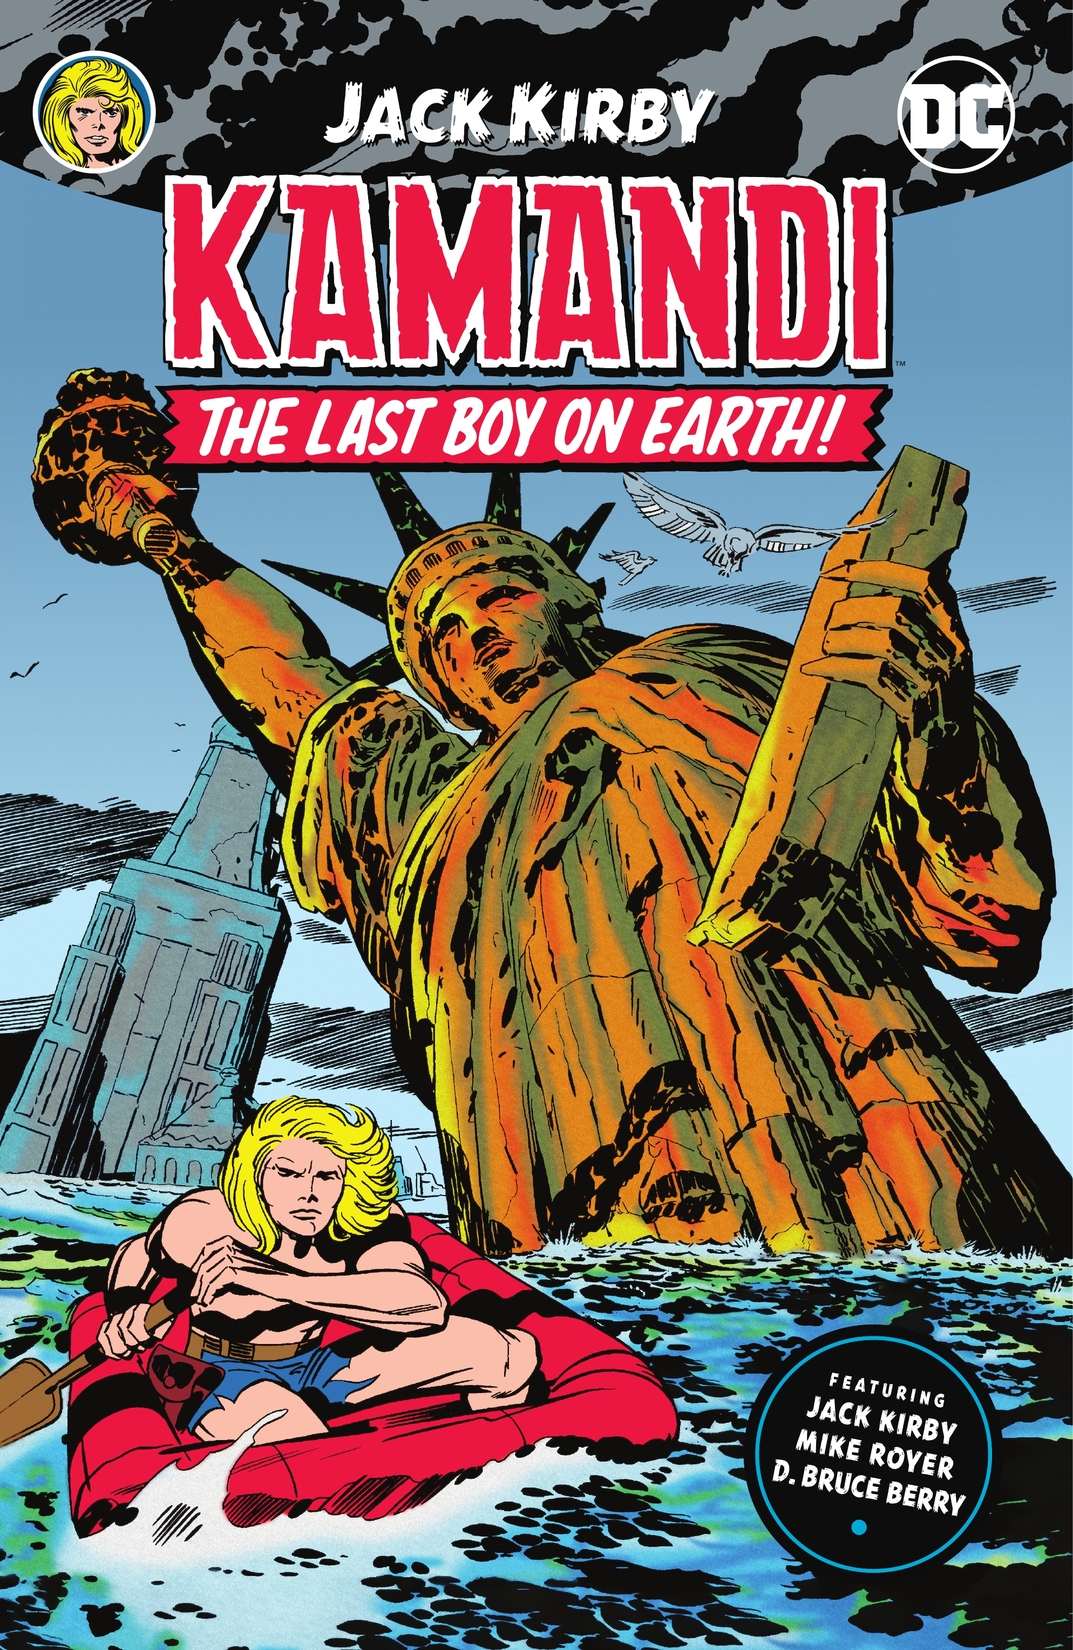 Kamandi, The Last Boy on Earth by Jack Kirby Vol. 1 preview images